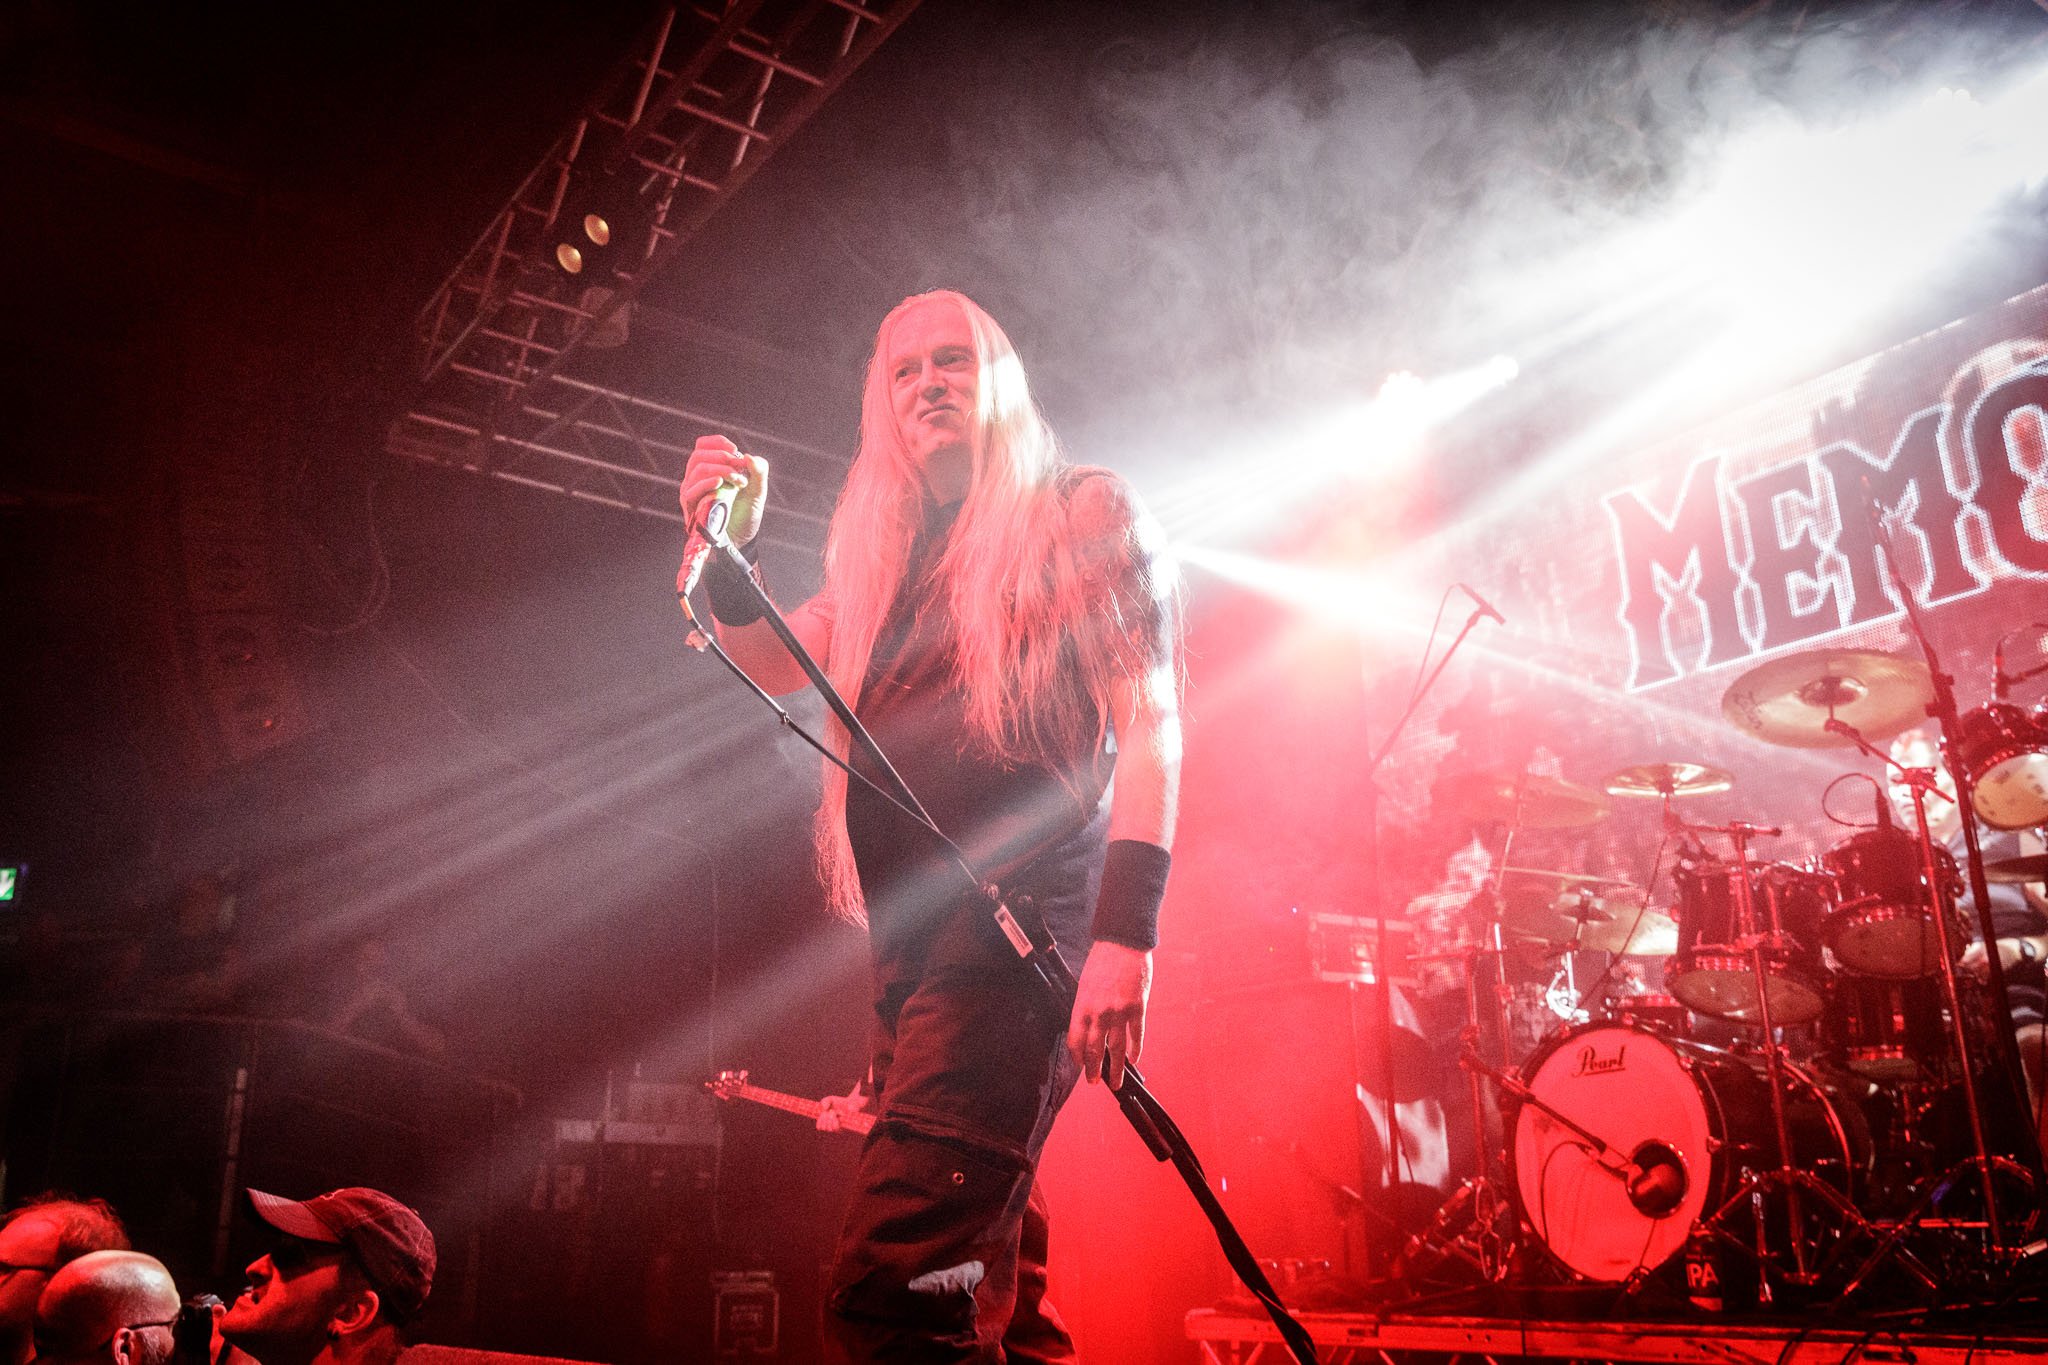 Memoriam at the Damnation Festival in Leeds on November 6th 2021